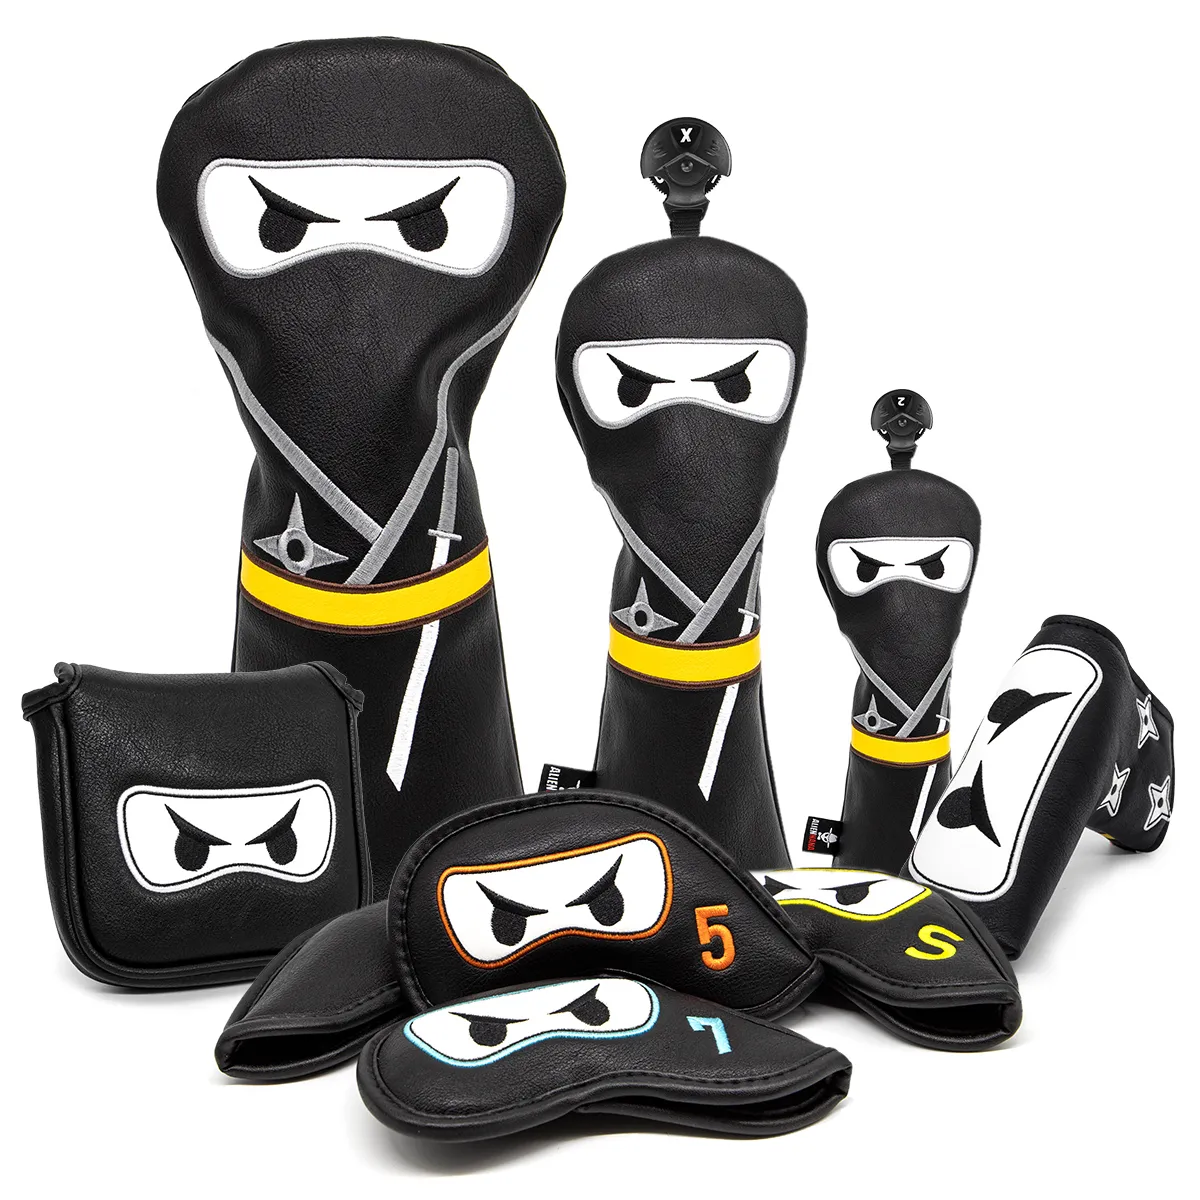 Other Golf Products Club headcover Set Aliennana Black Ninja Driver Head Cover Fairway Headcvoer Hybird Blade putter Mallet Putter Covers 230413